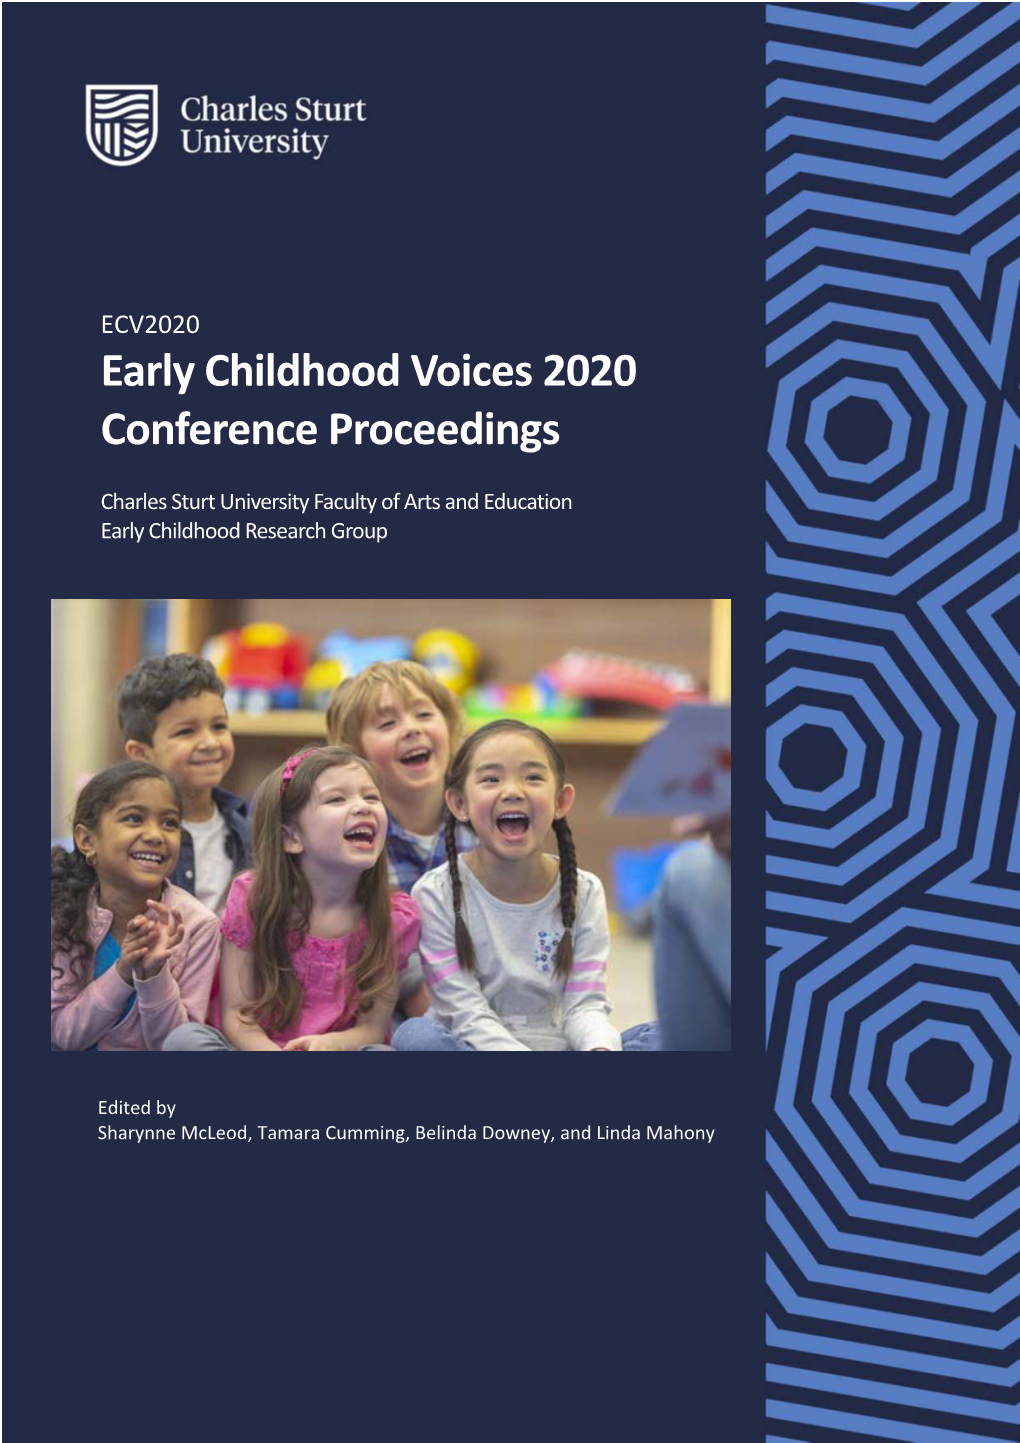 ECV2020 Early Childhood Voices 2020